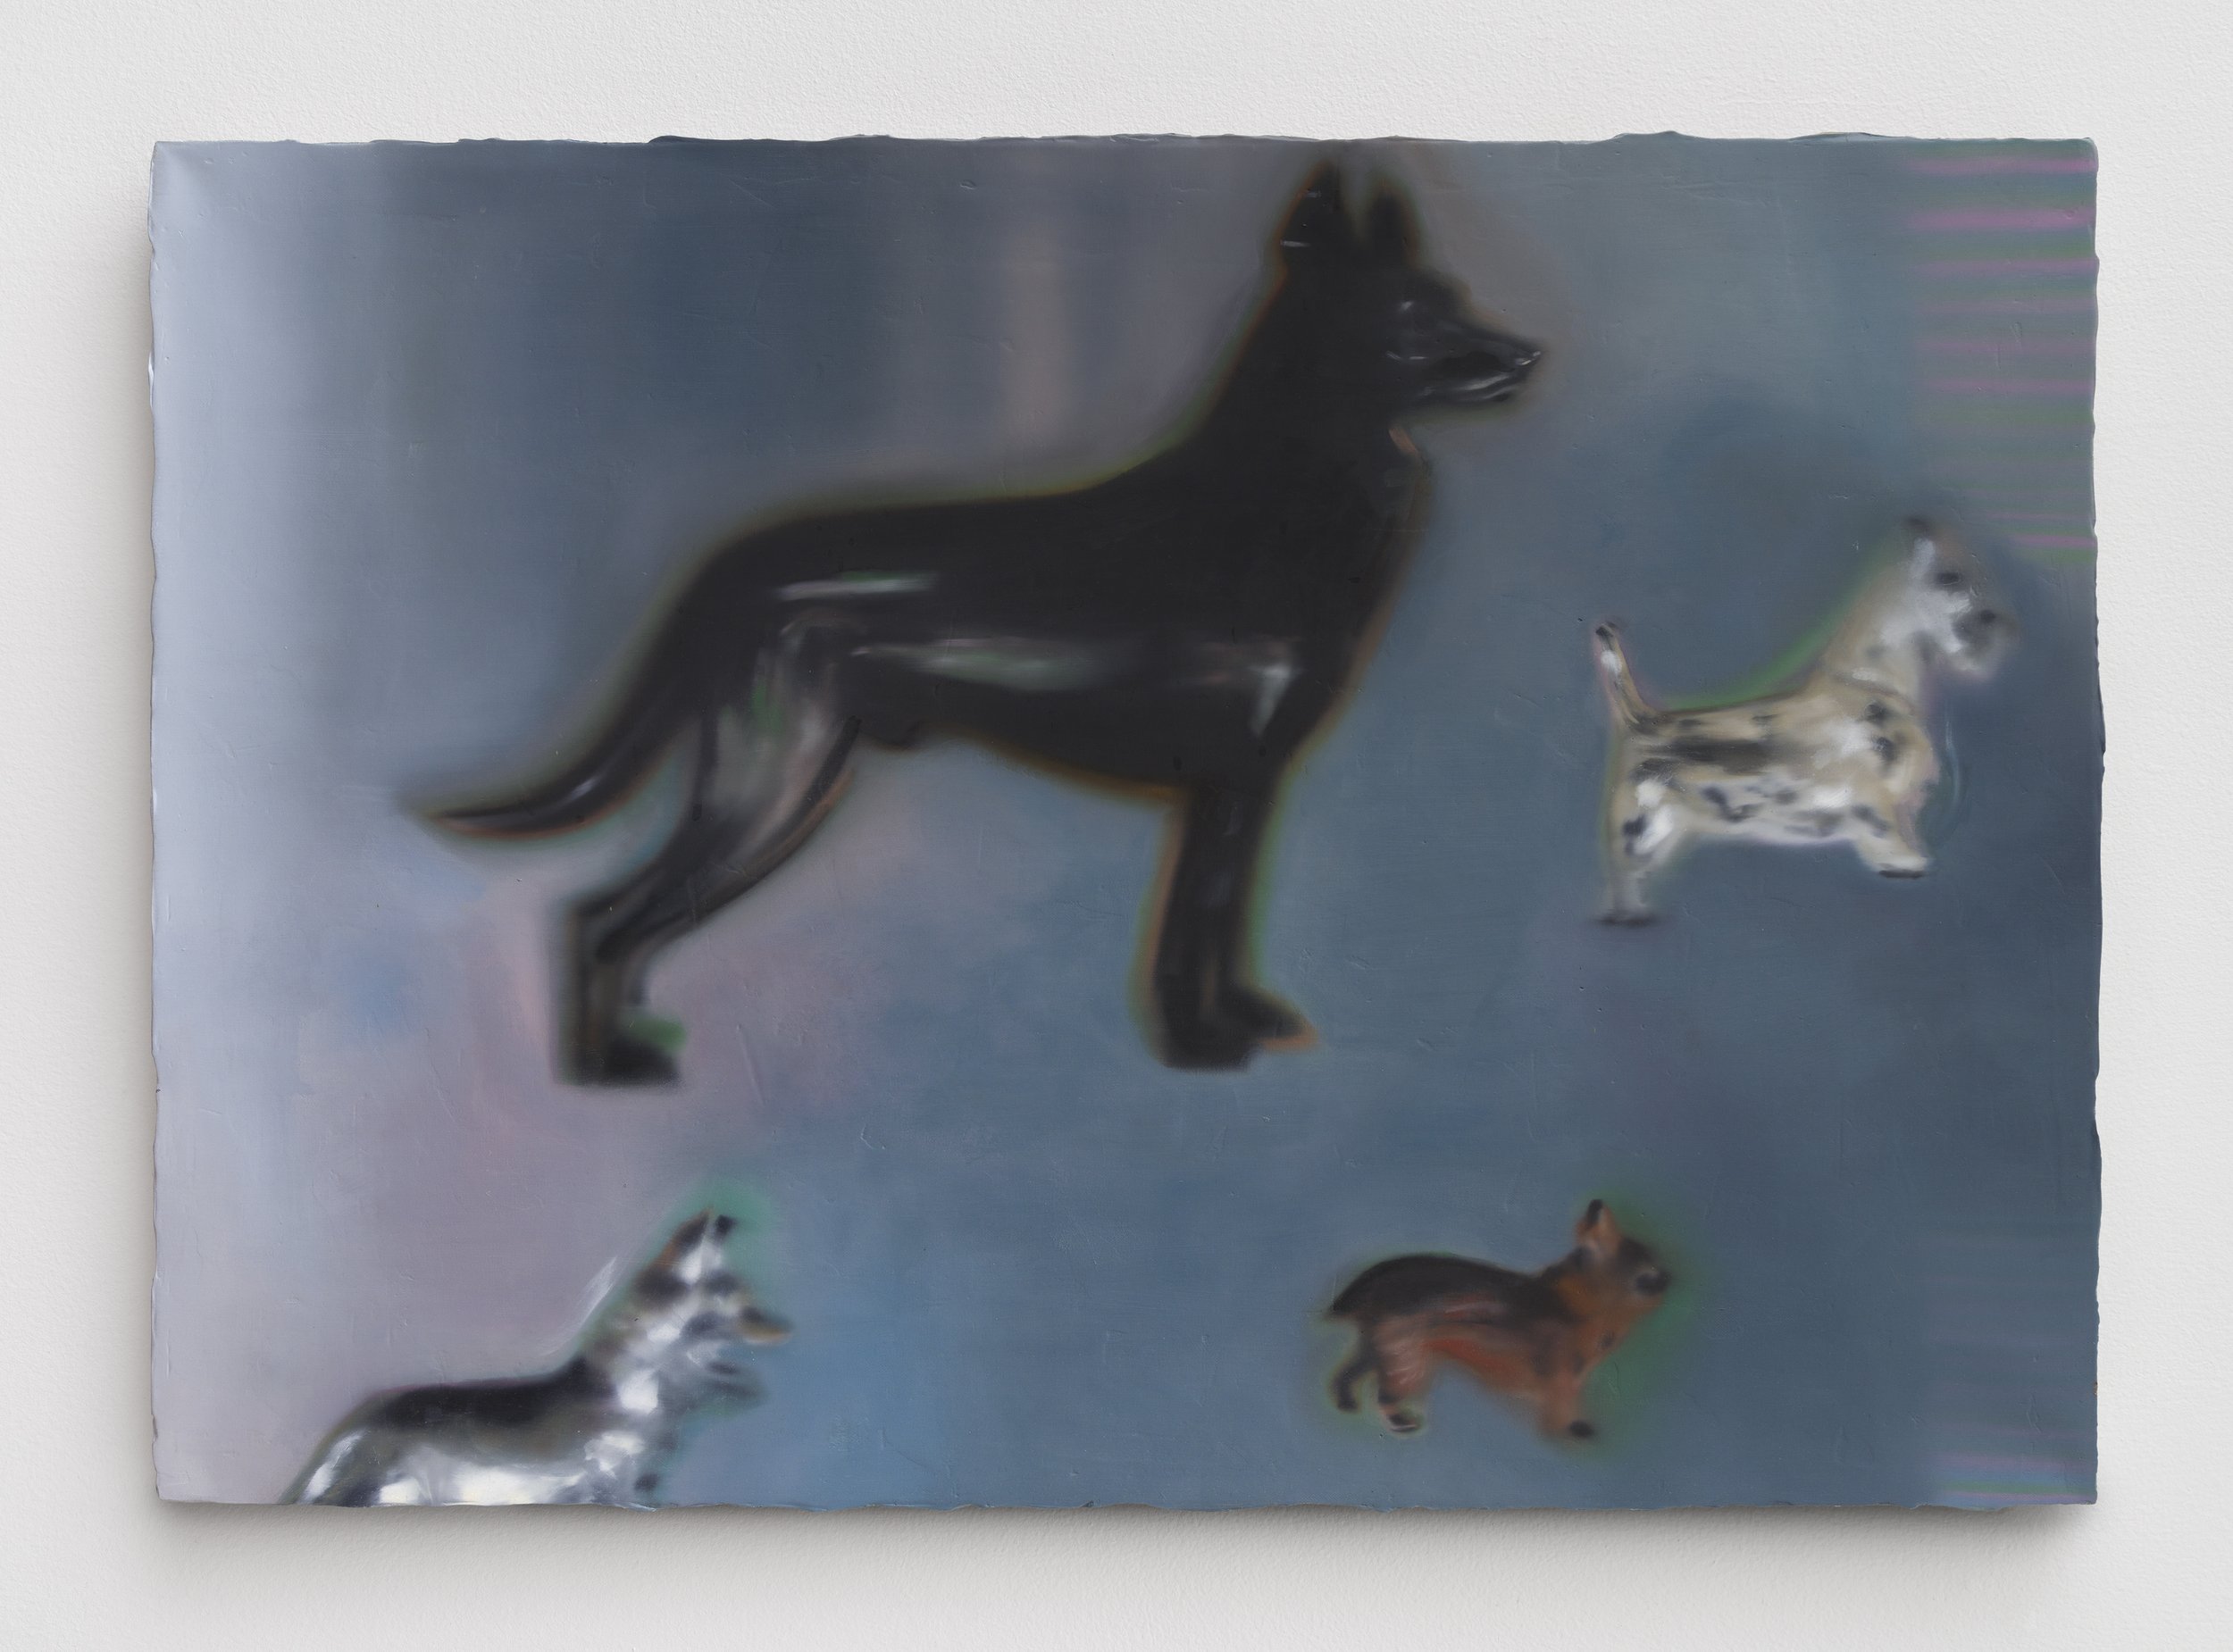   Uncs All-Metal Dogs , 2022. Oil on linen. 24 x 34 inches. 